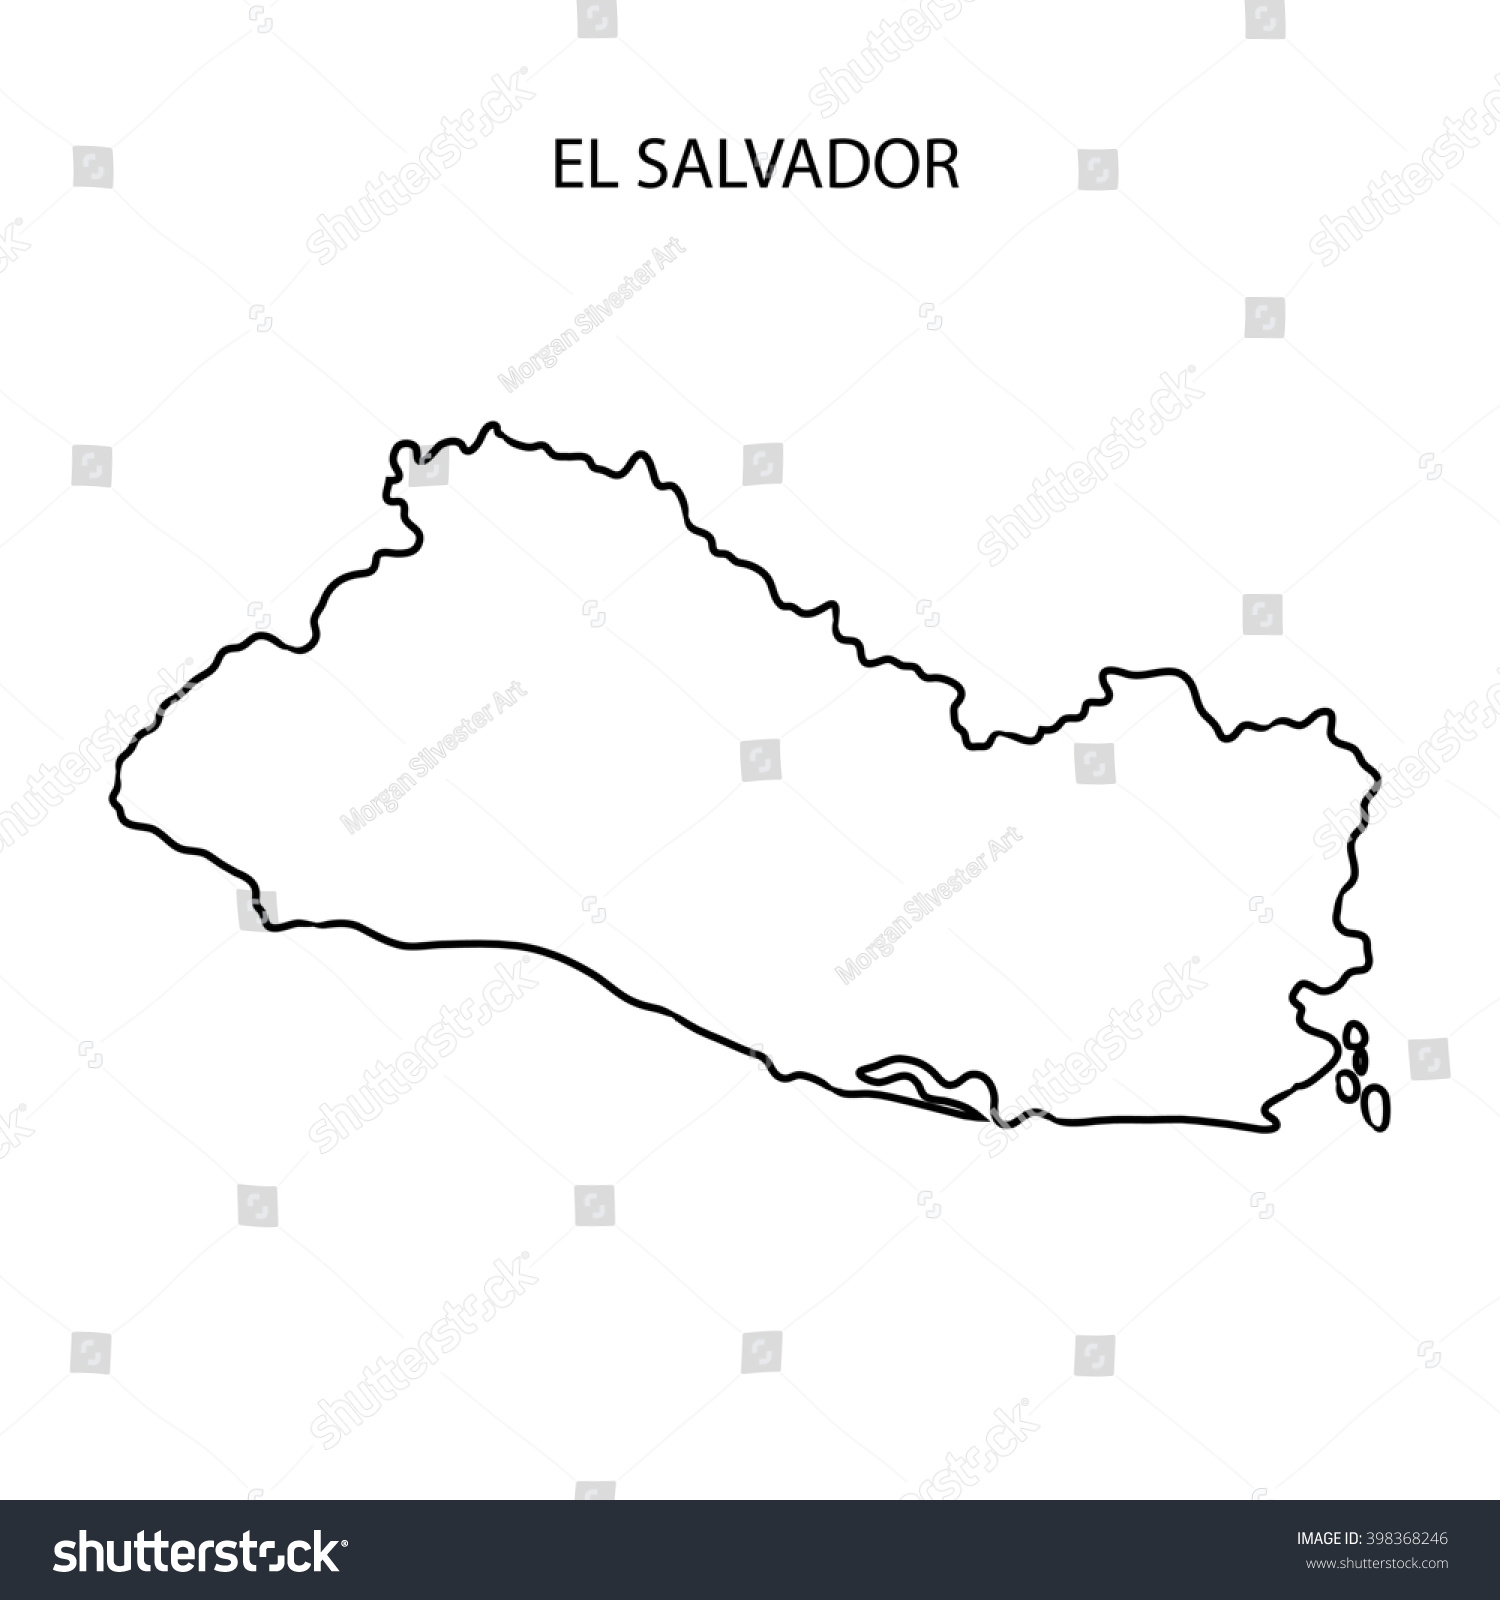 280 Cute El Salvador Map Coloring Page with Animal character